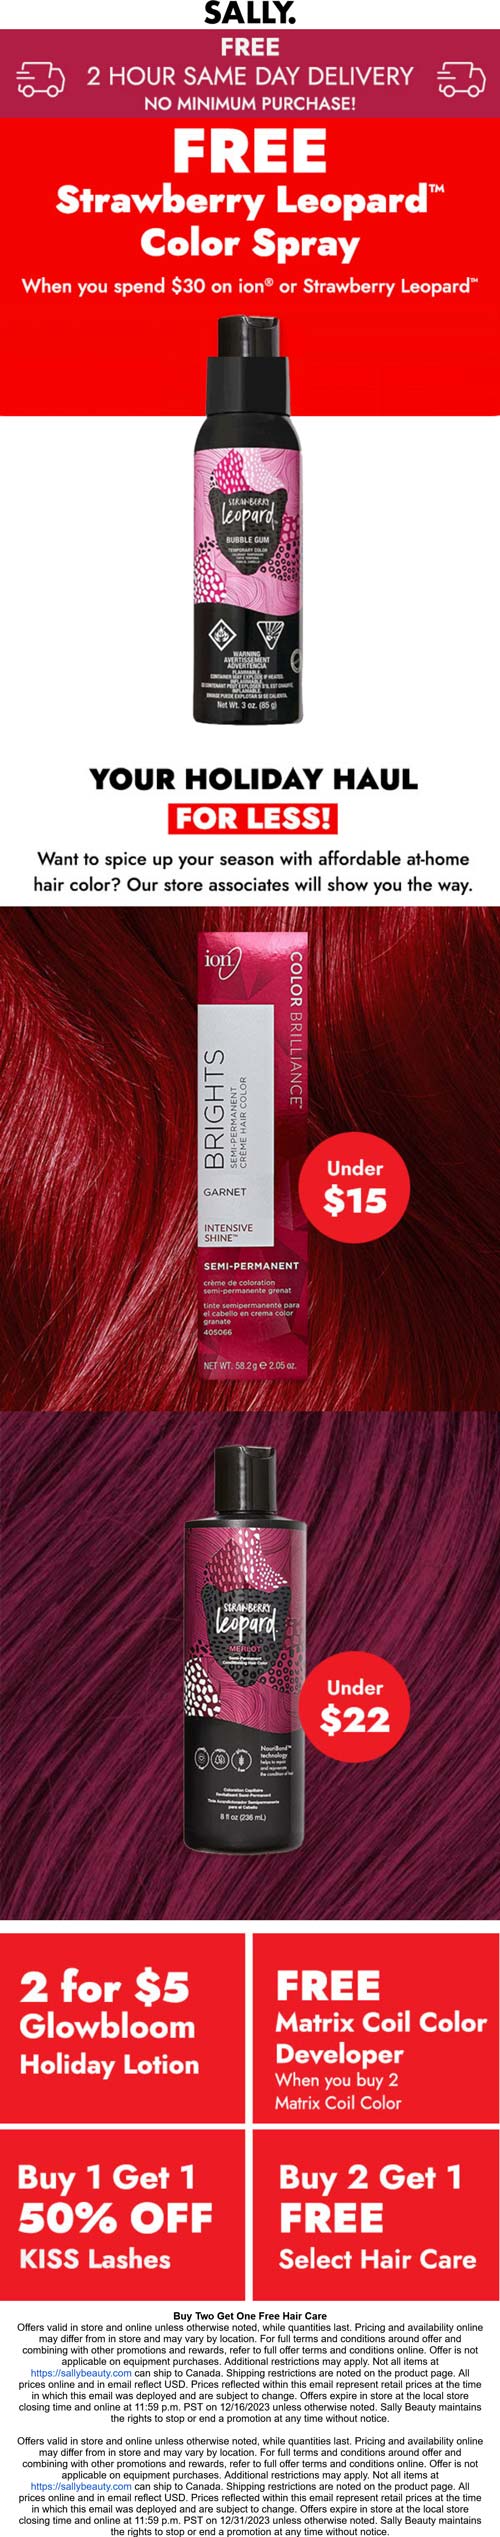 Sally stores Coupon  3rd hair care free & free color spray on $30 ion or strawberry leopard at Sally #sally 